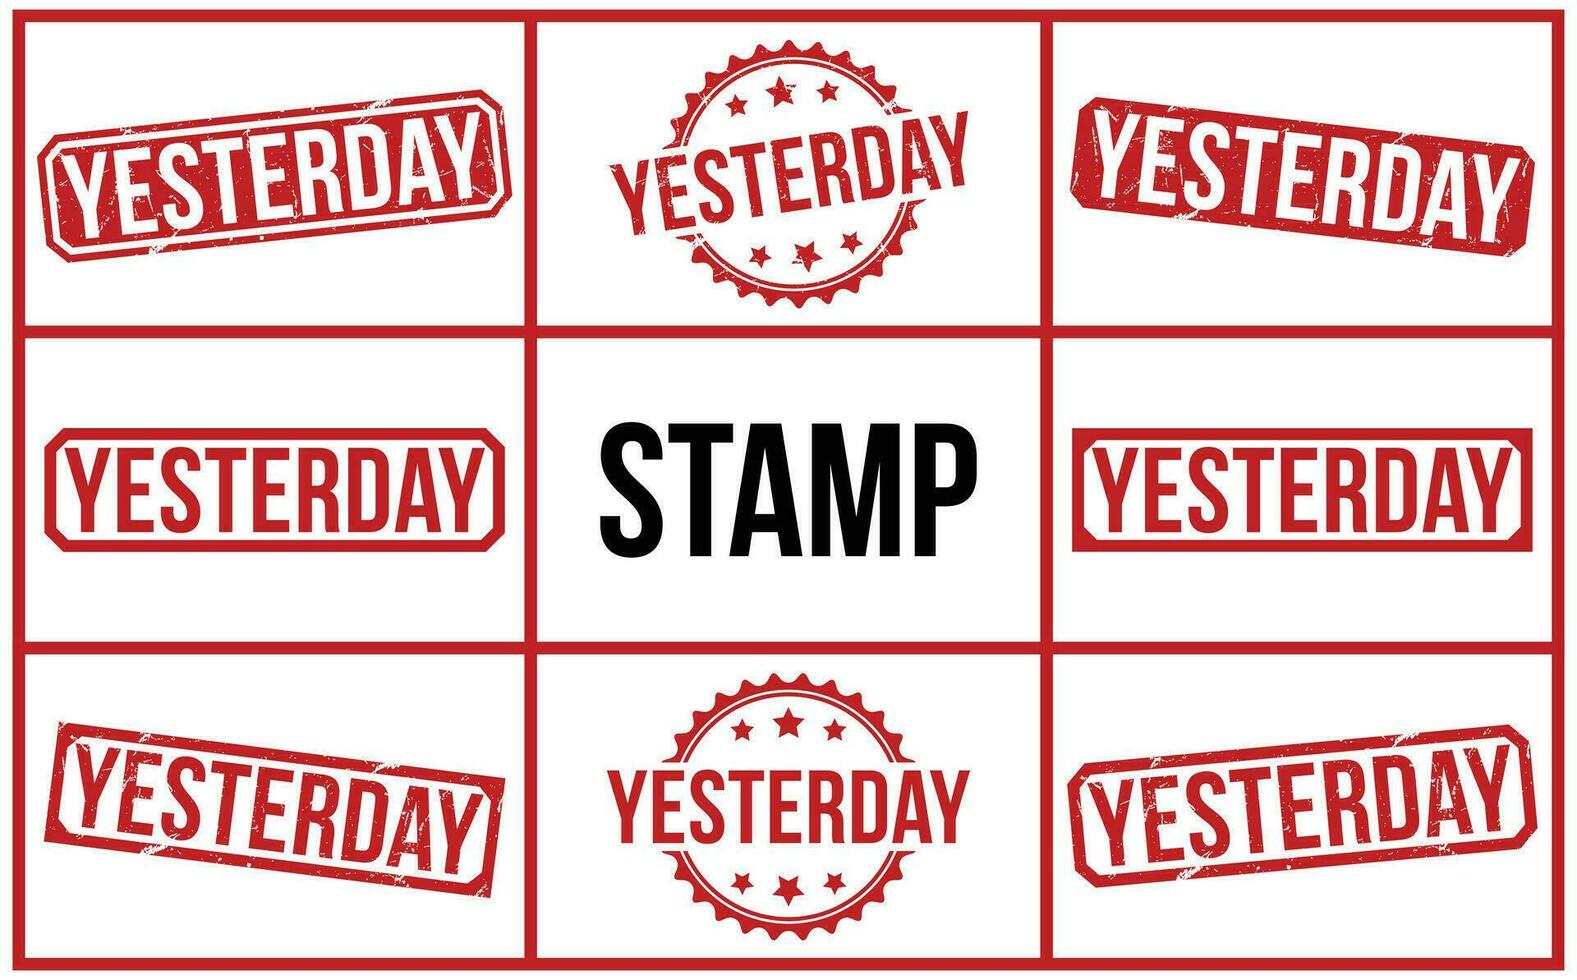 Yesterday stamp red rubber stamp on white background. Yesterday stamp sign. Yesterday stamp. vector